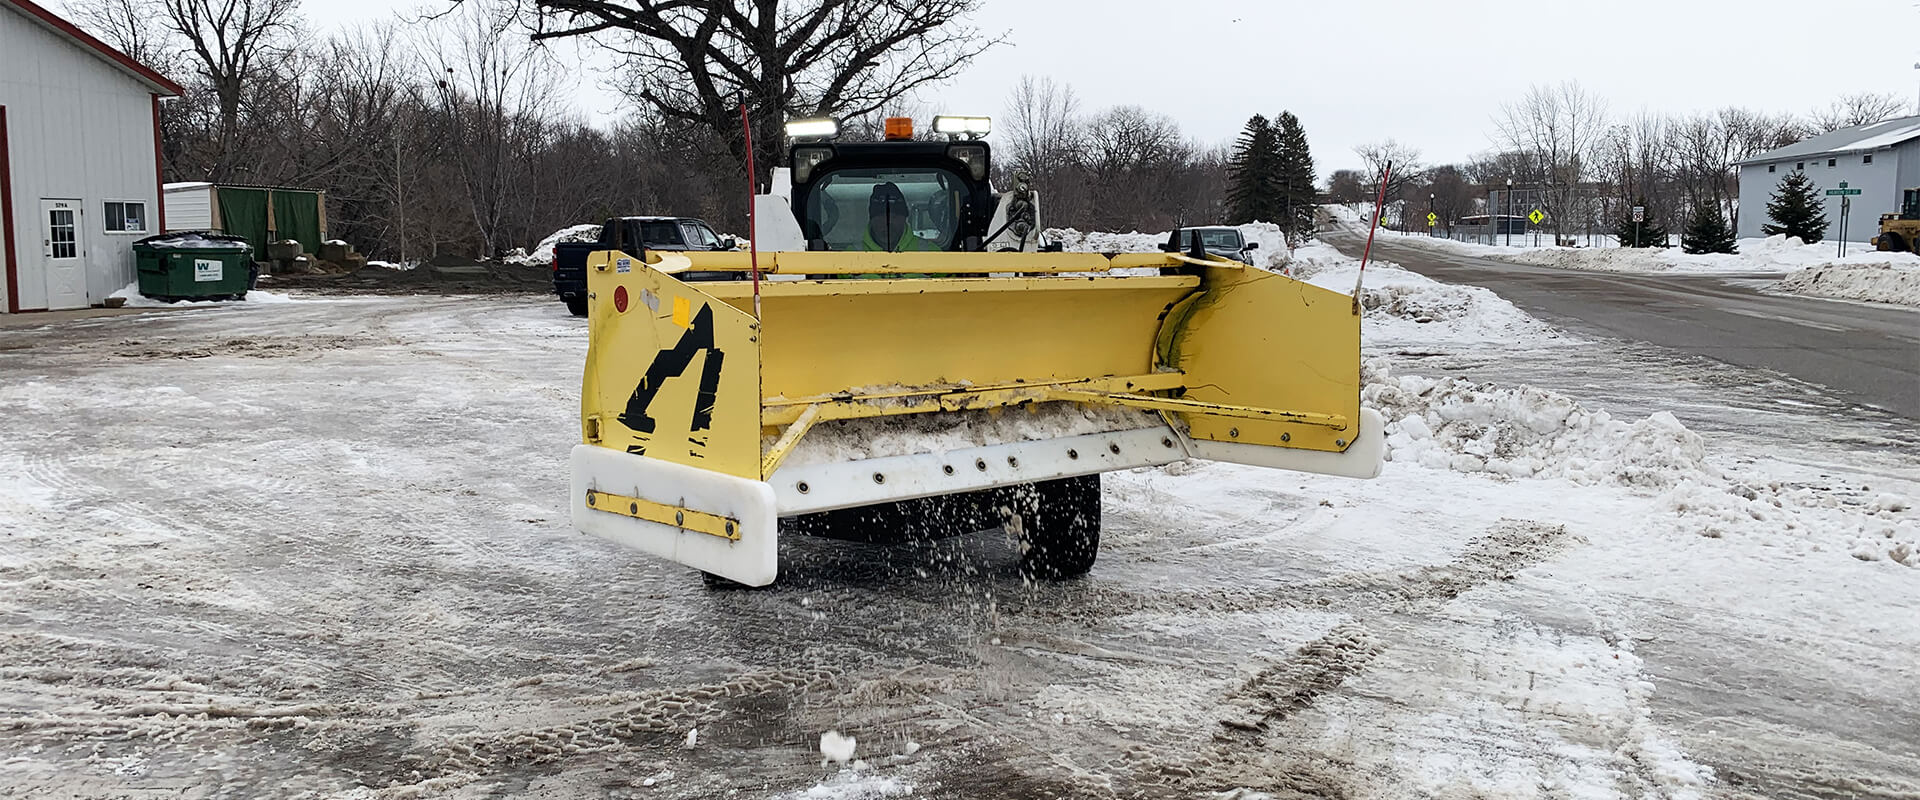 SnowWolf Box Plow with custom May Wes poly cutting edge and skid shoes